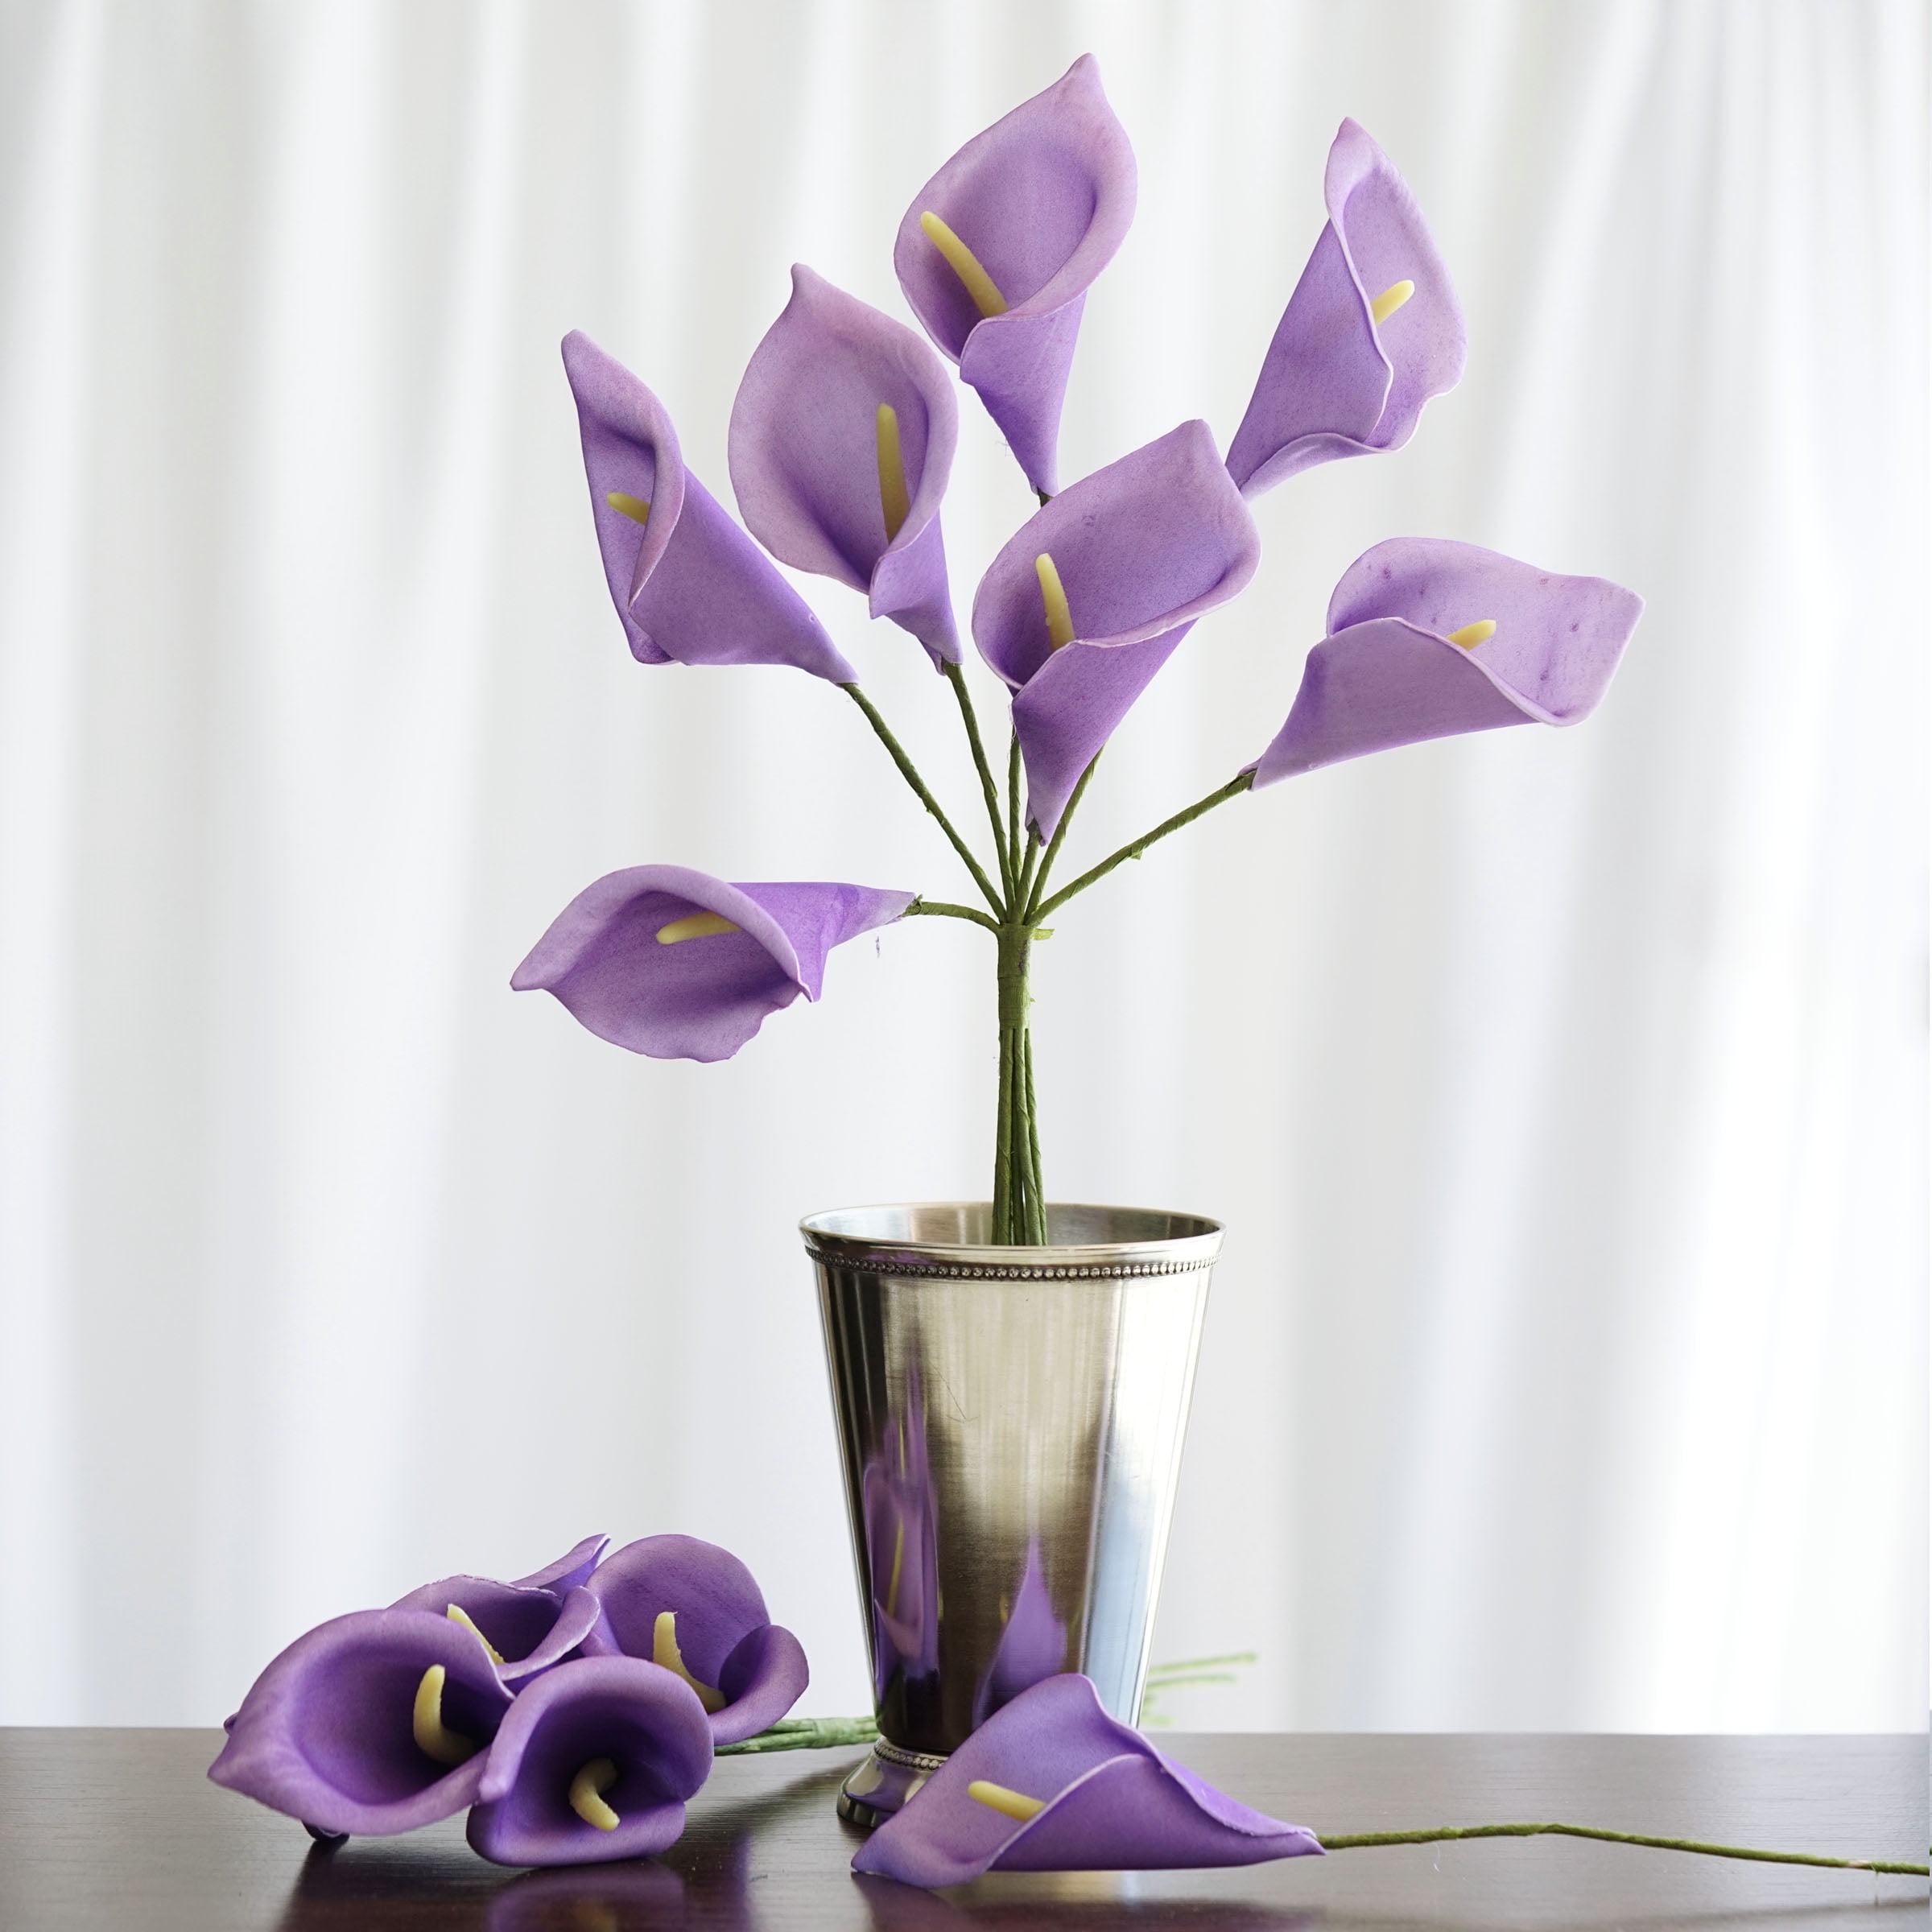 42 Calla Lily Artificial Wedding Party Events Flowers For Centerpiece Decor 